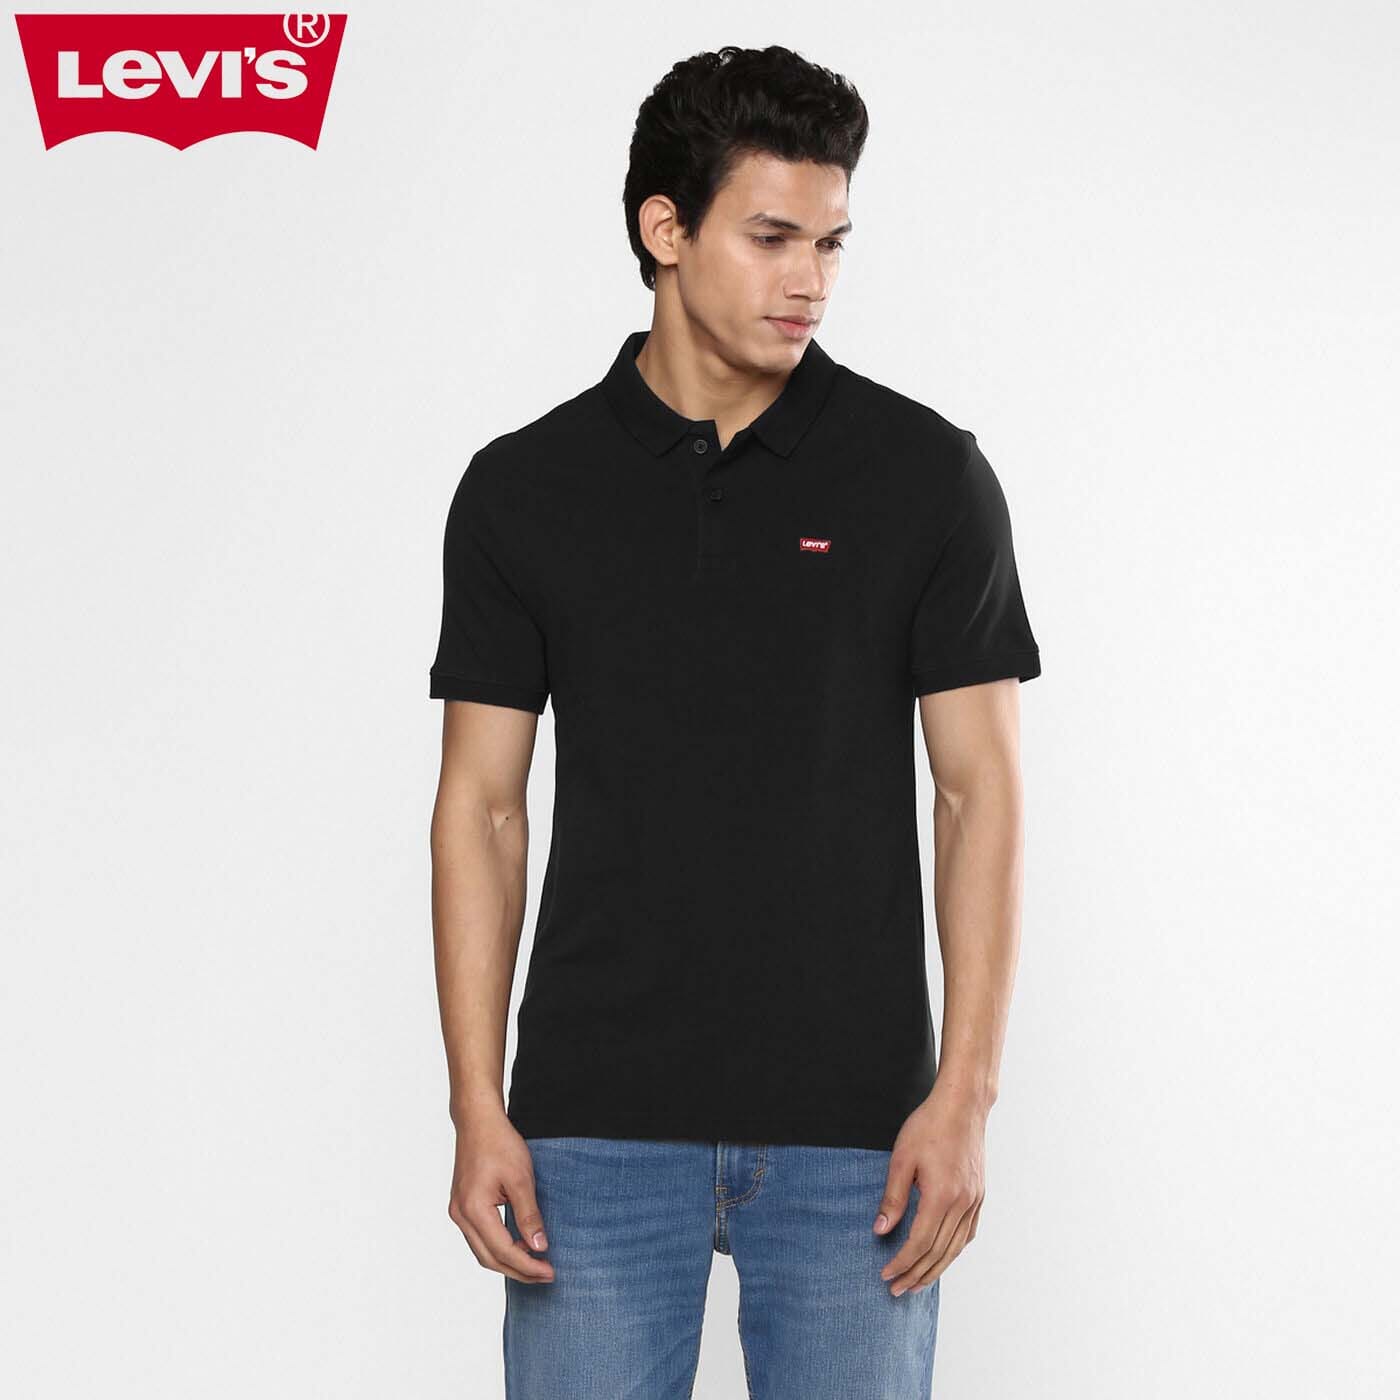 Levi'S Nepal: Levi'S Official Store at 